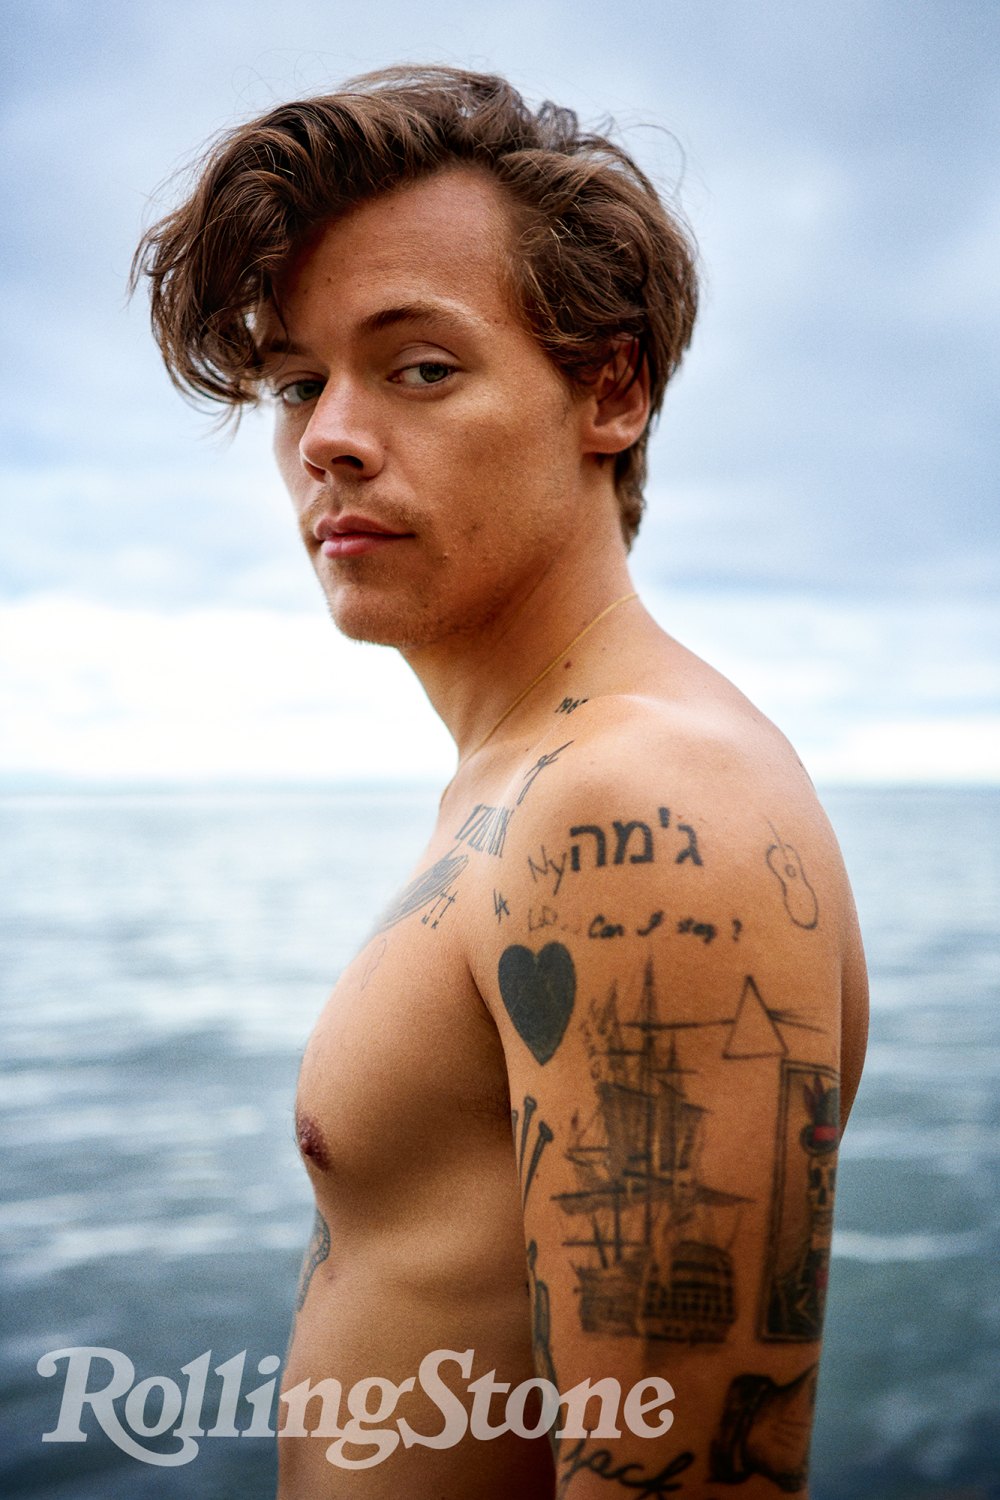 Harry Styles on 1D, Camille Rowe, More ‘Rolling Stone’ Revelations